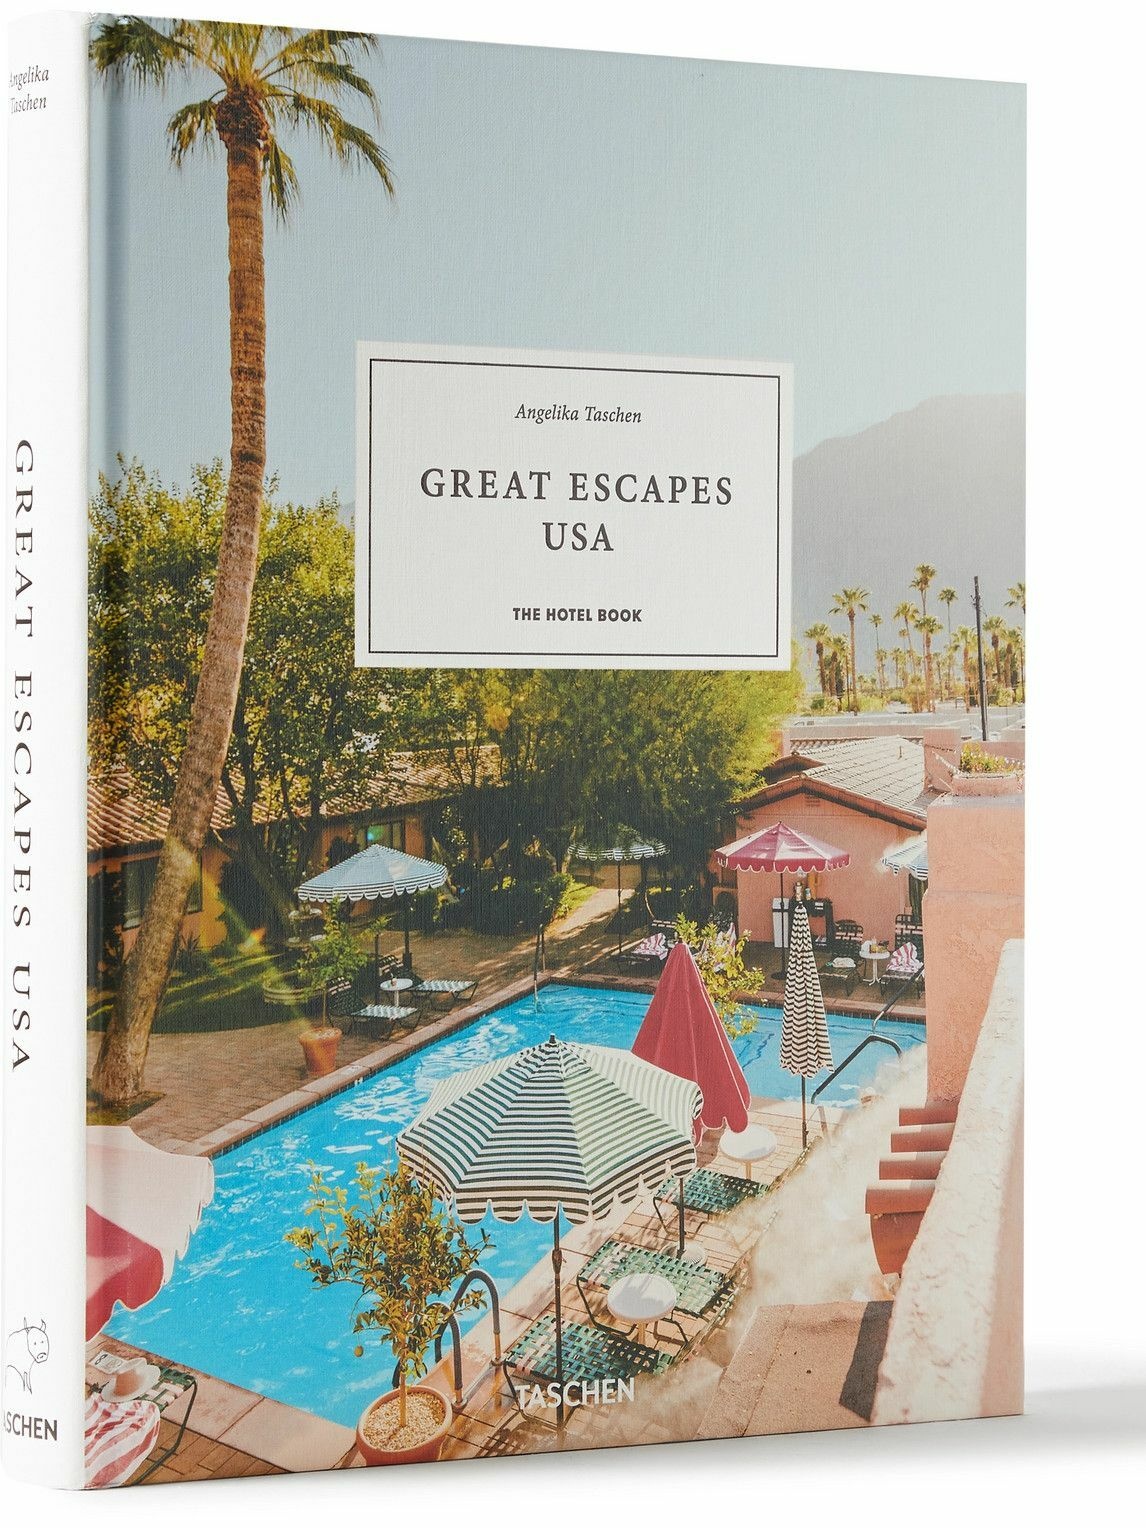 Photo: Taschen - The Hotel Book: Great Escapes USA Hardcover Book